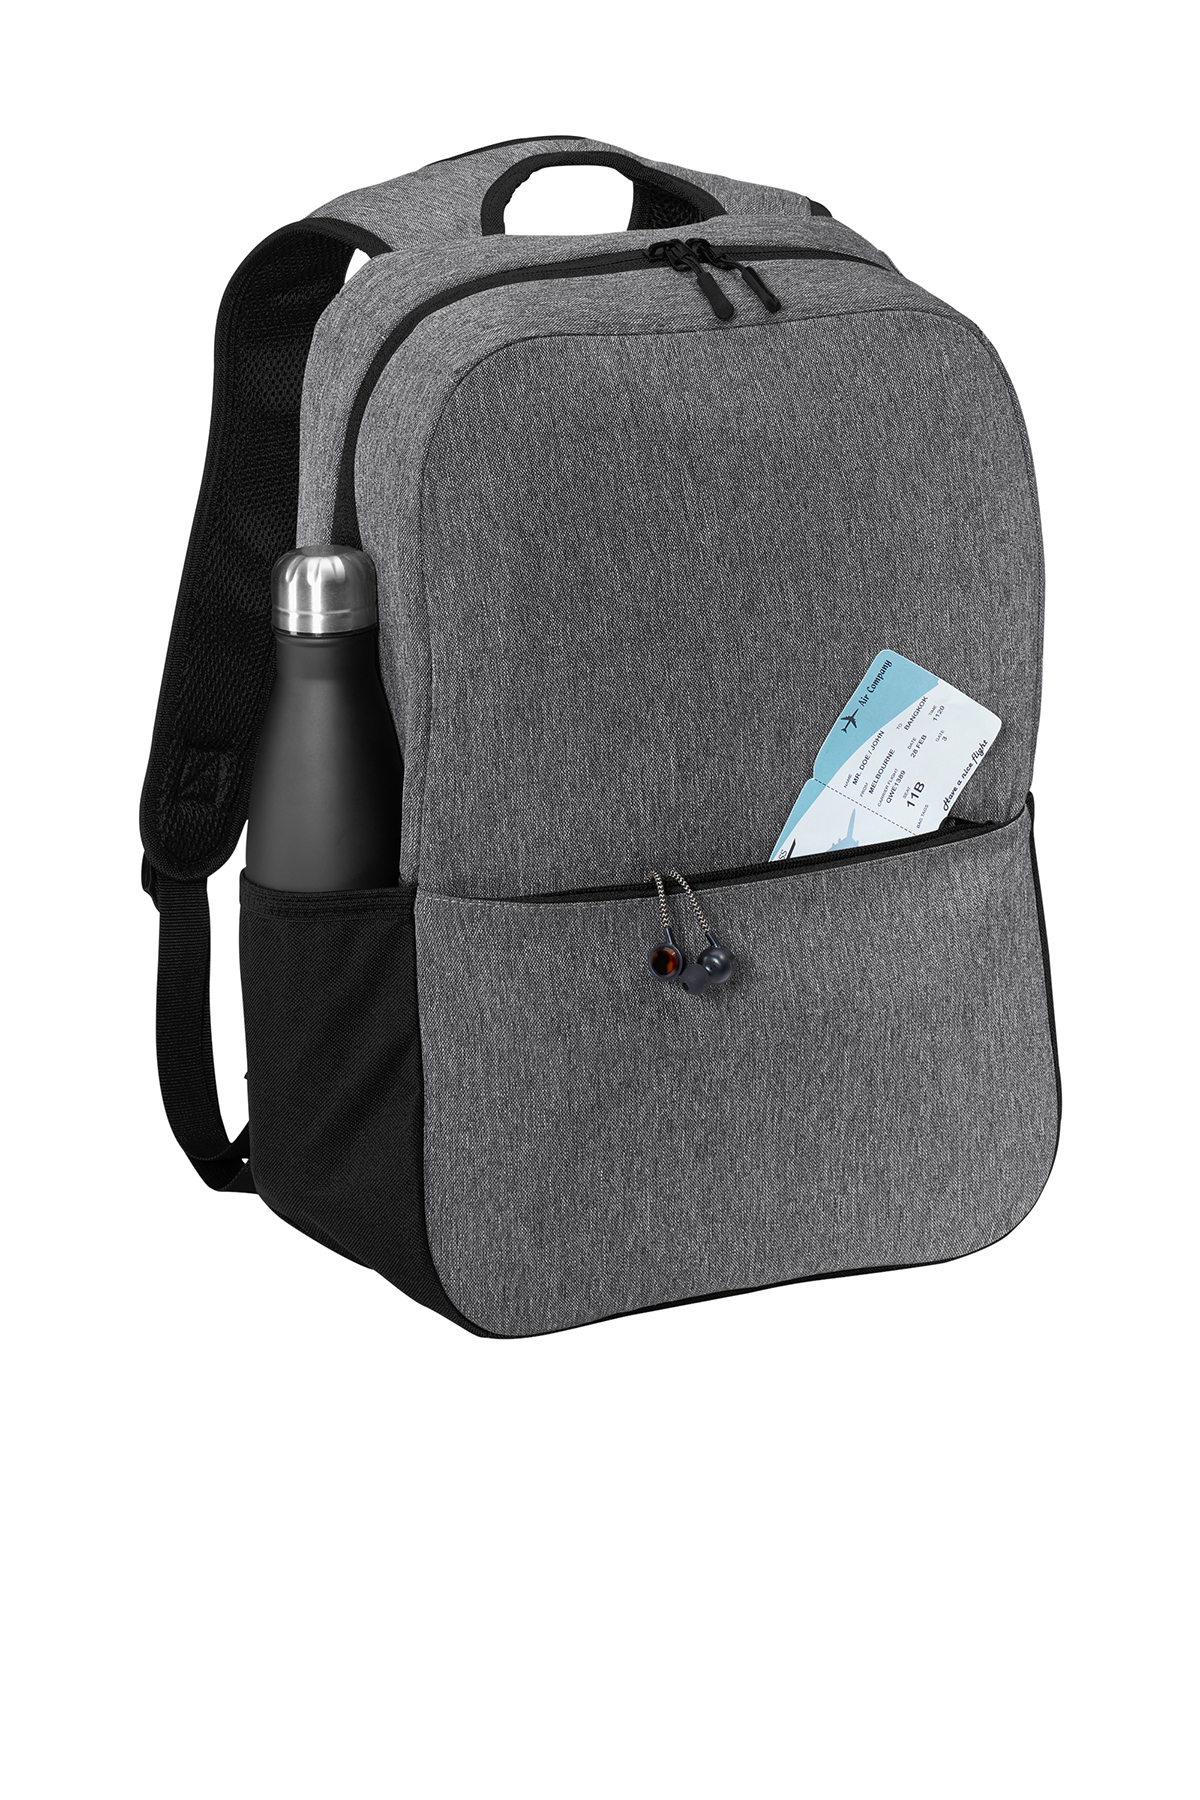 Port Authority Access Square Backpack | Product | SanMar